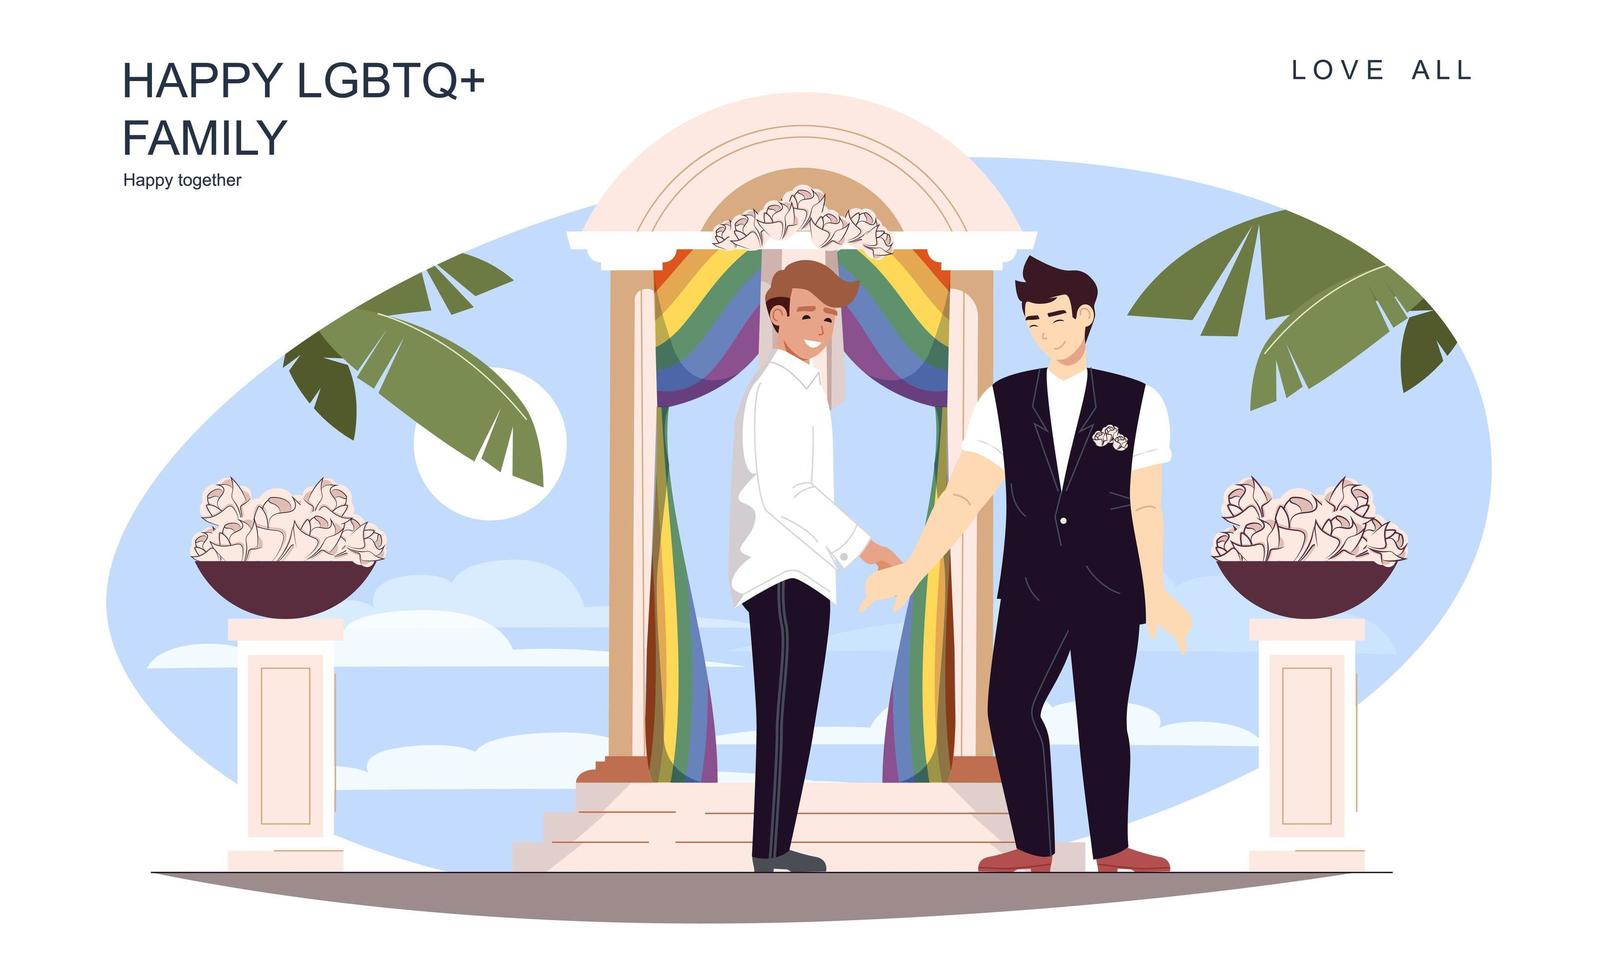 Happy LGBT family concept. Loving men get married in wedding suits at festive ceremony on island scene. Diverse multiracial couple, gay relationship. Vector illustration of people in flat design